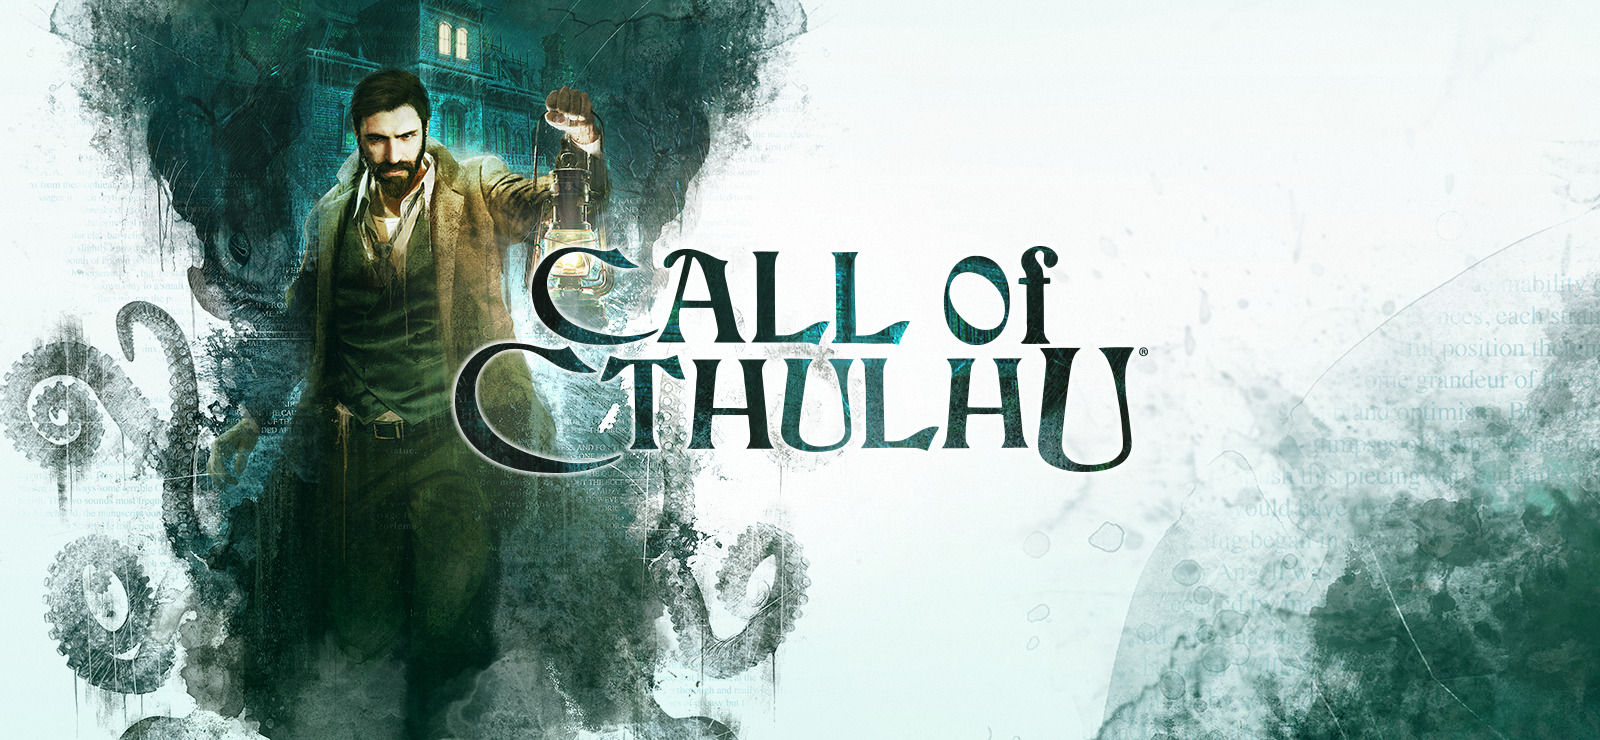 the call of cthulhu